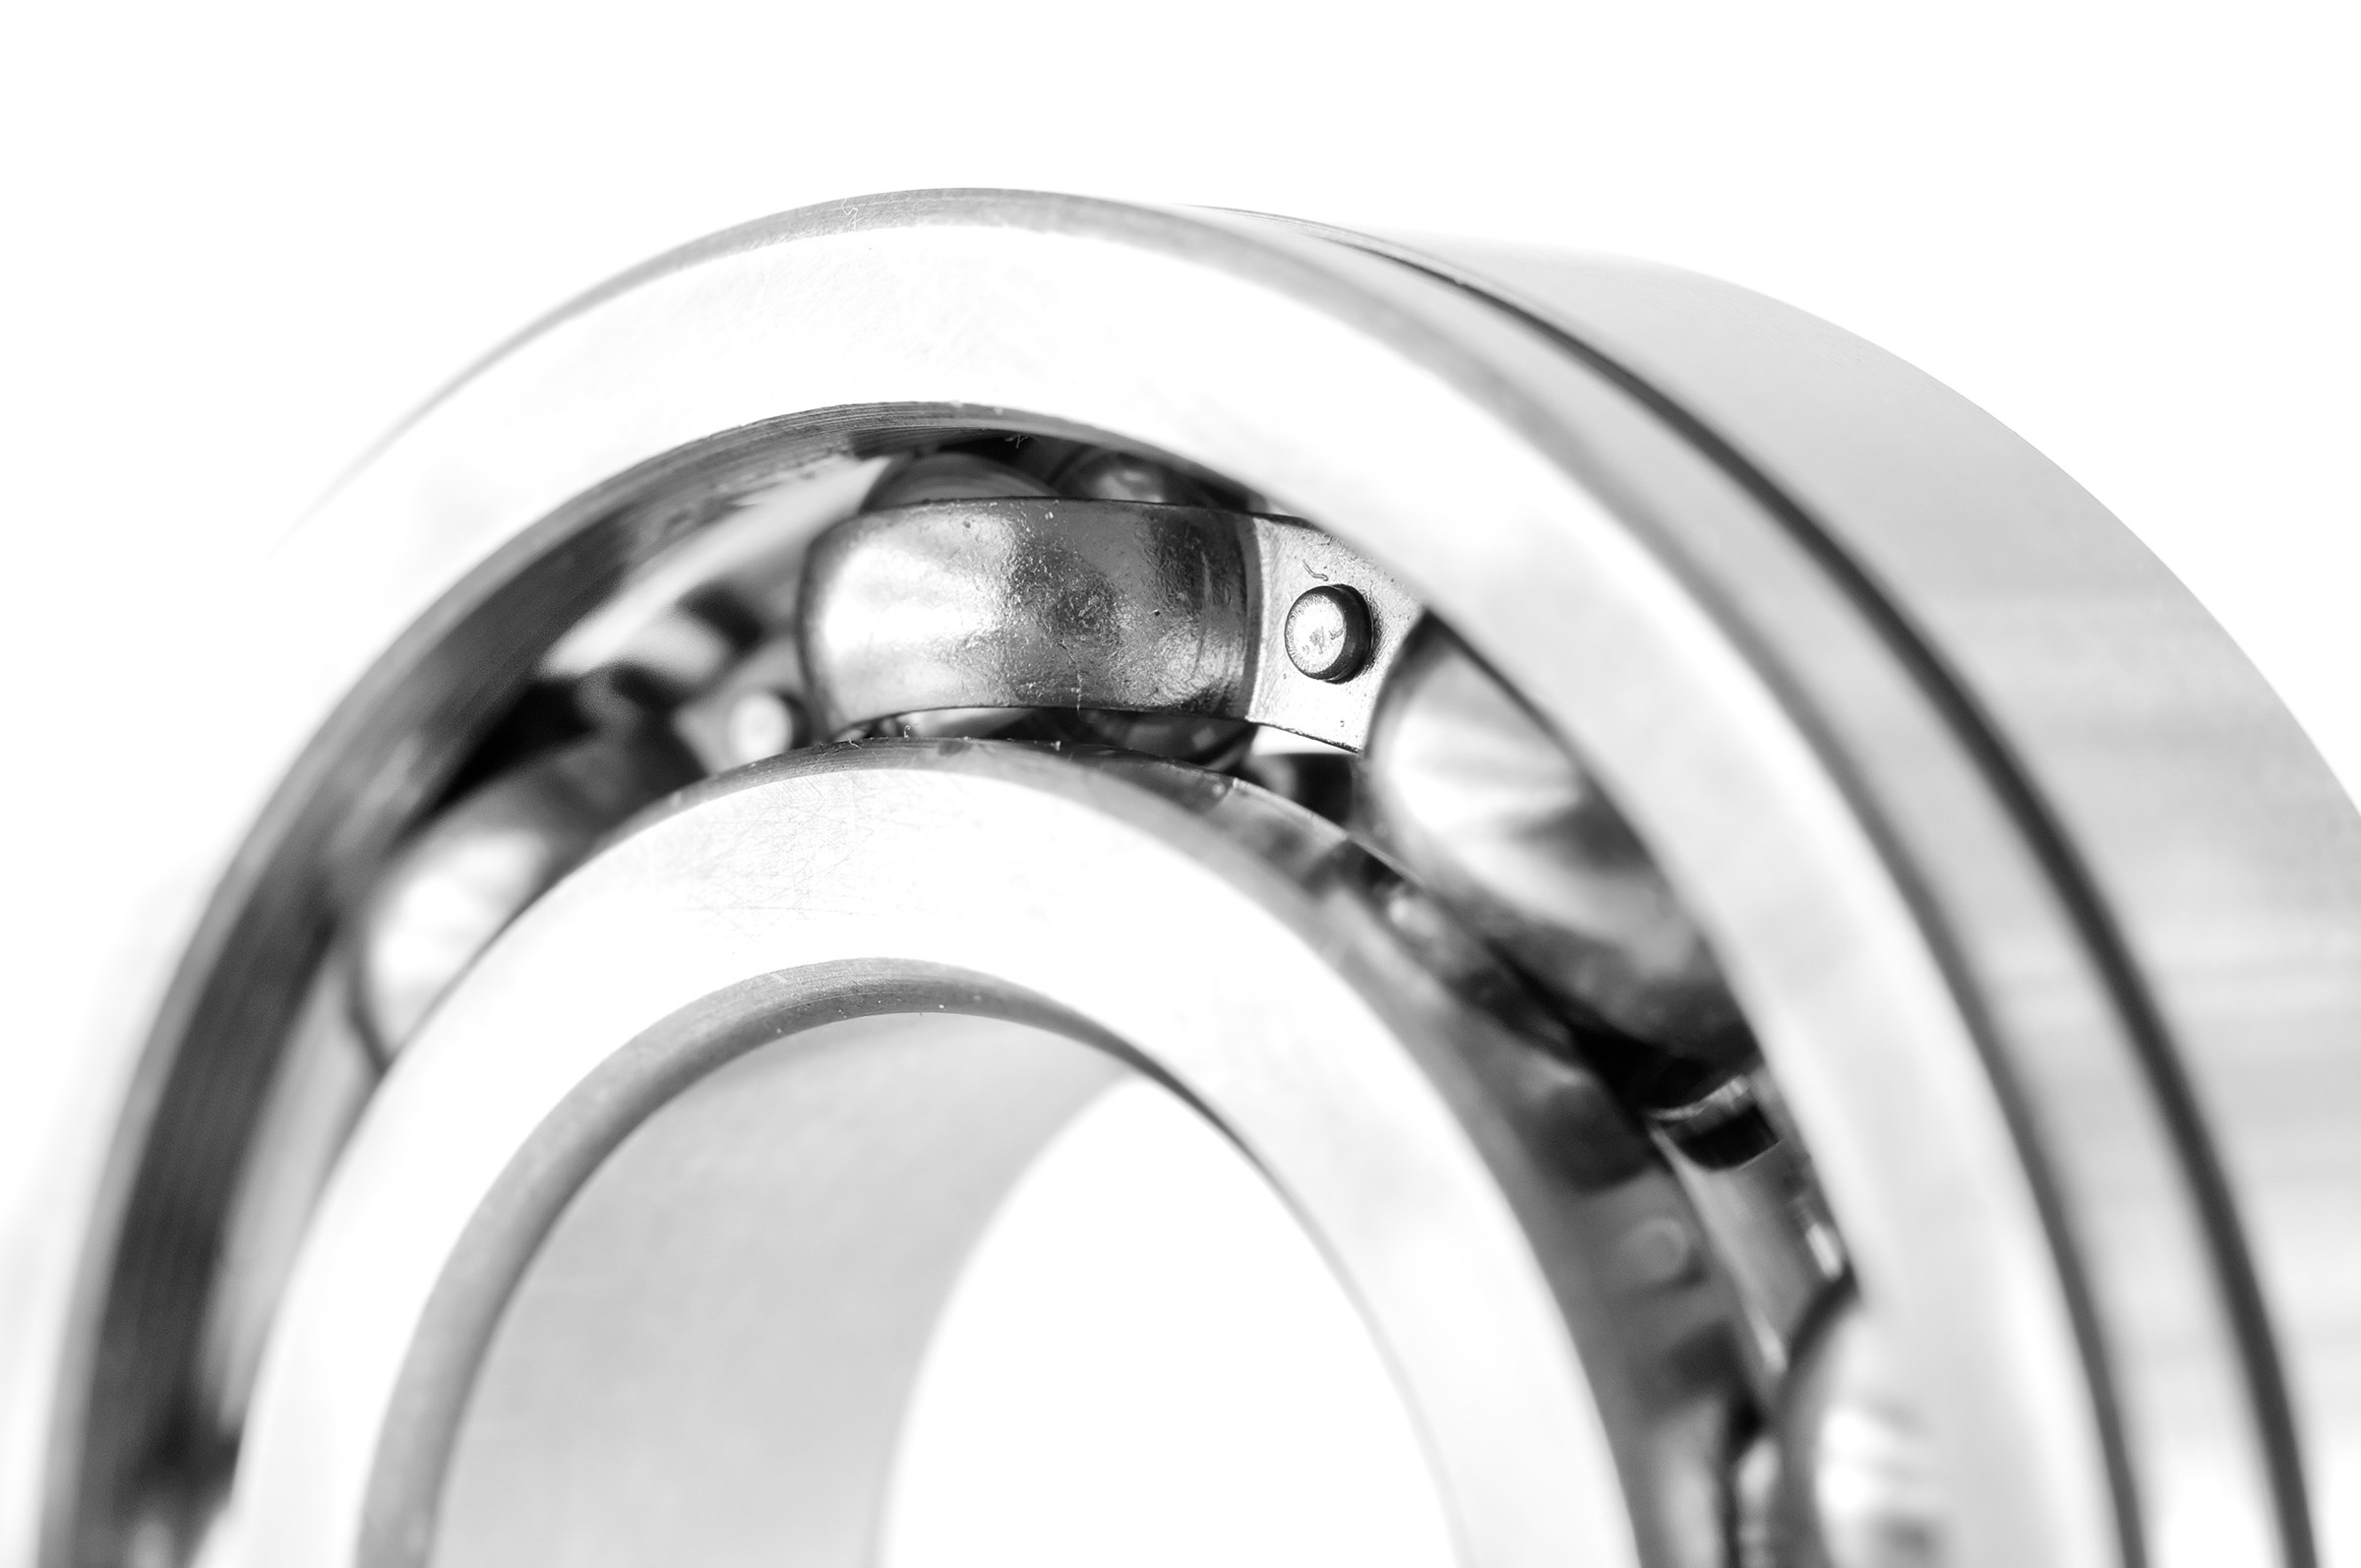 Close-up of ball bearings in gray and white